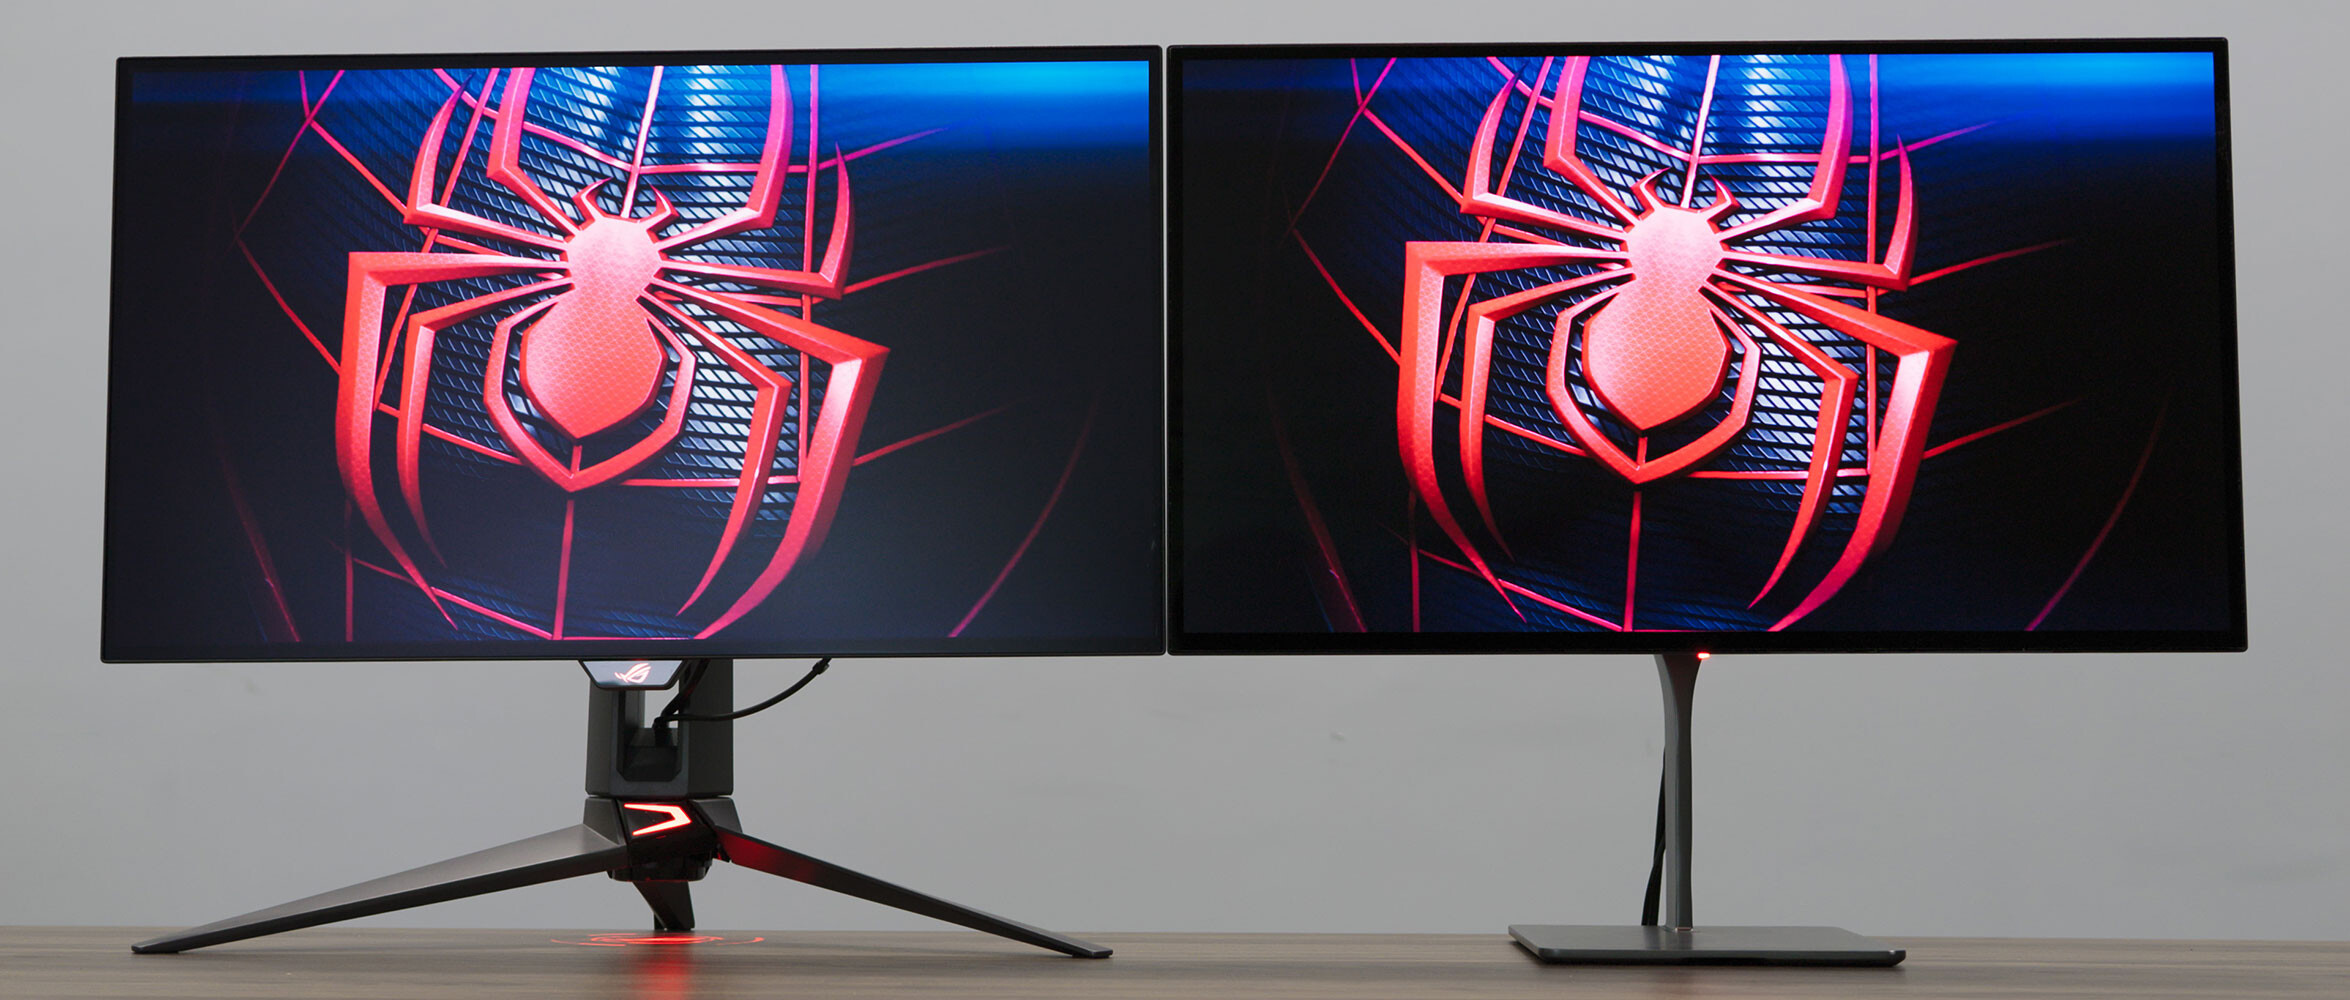 32-inch 240Hz 4K OLED monitors are coming — but I wouldn't